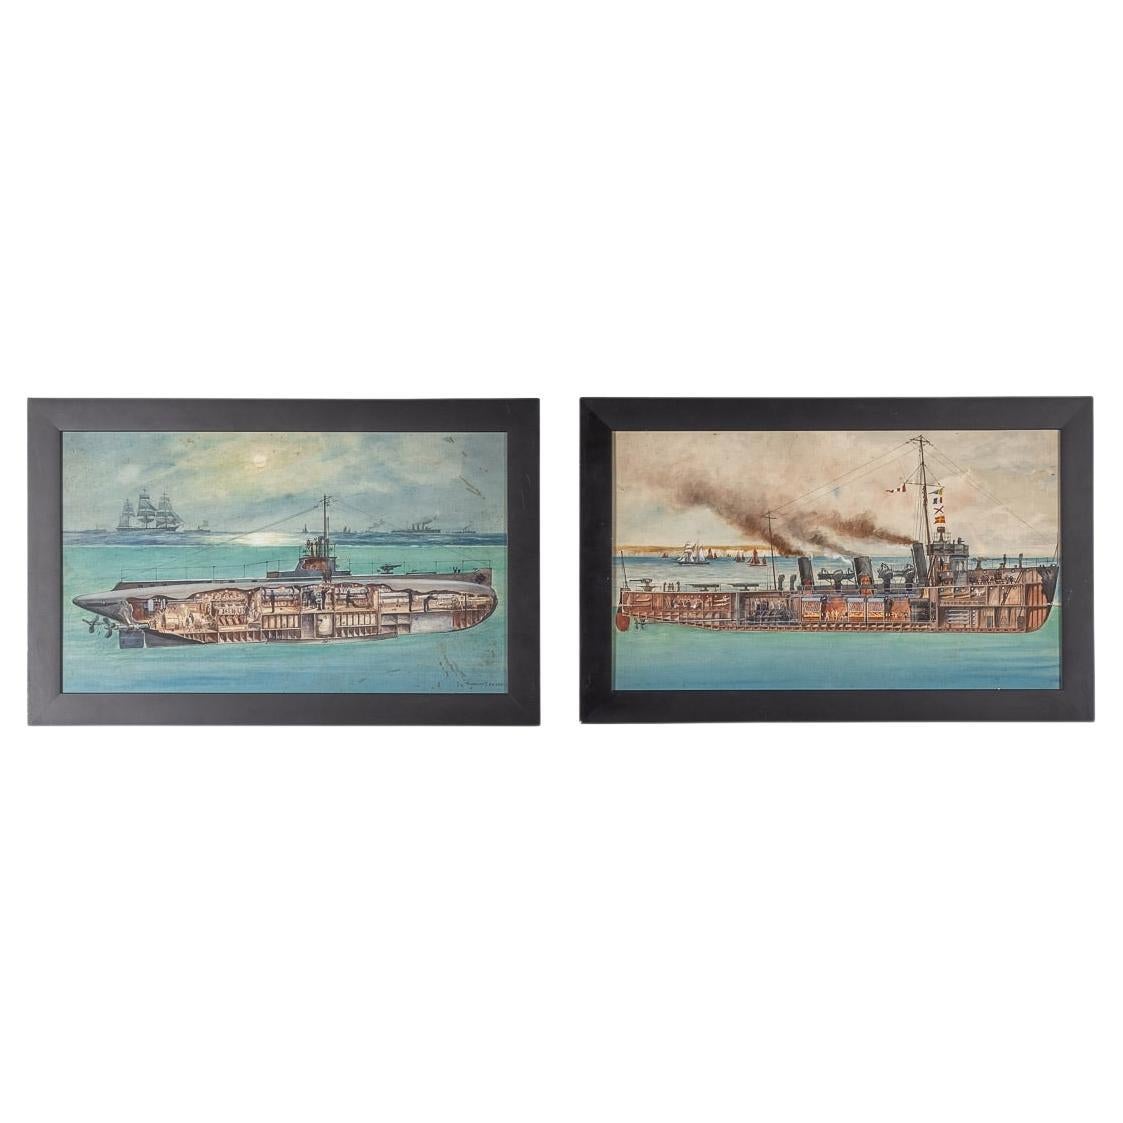 Pair of Warship Paintings by Charles De Lacy, British, 1856-1929